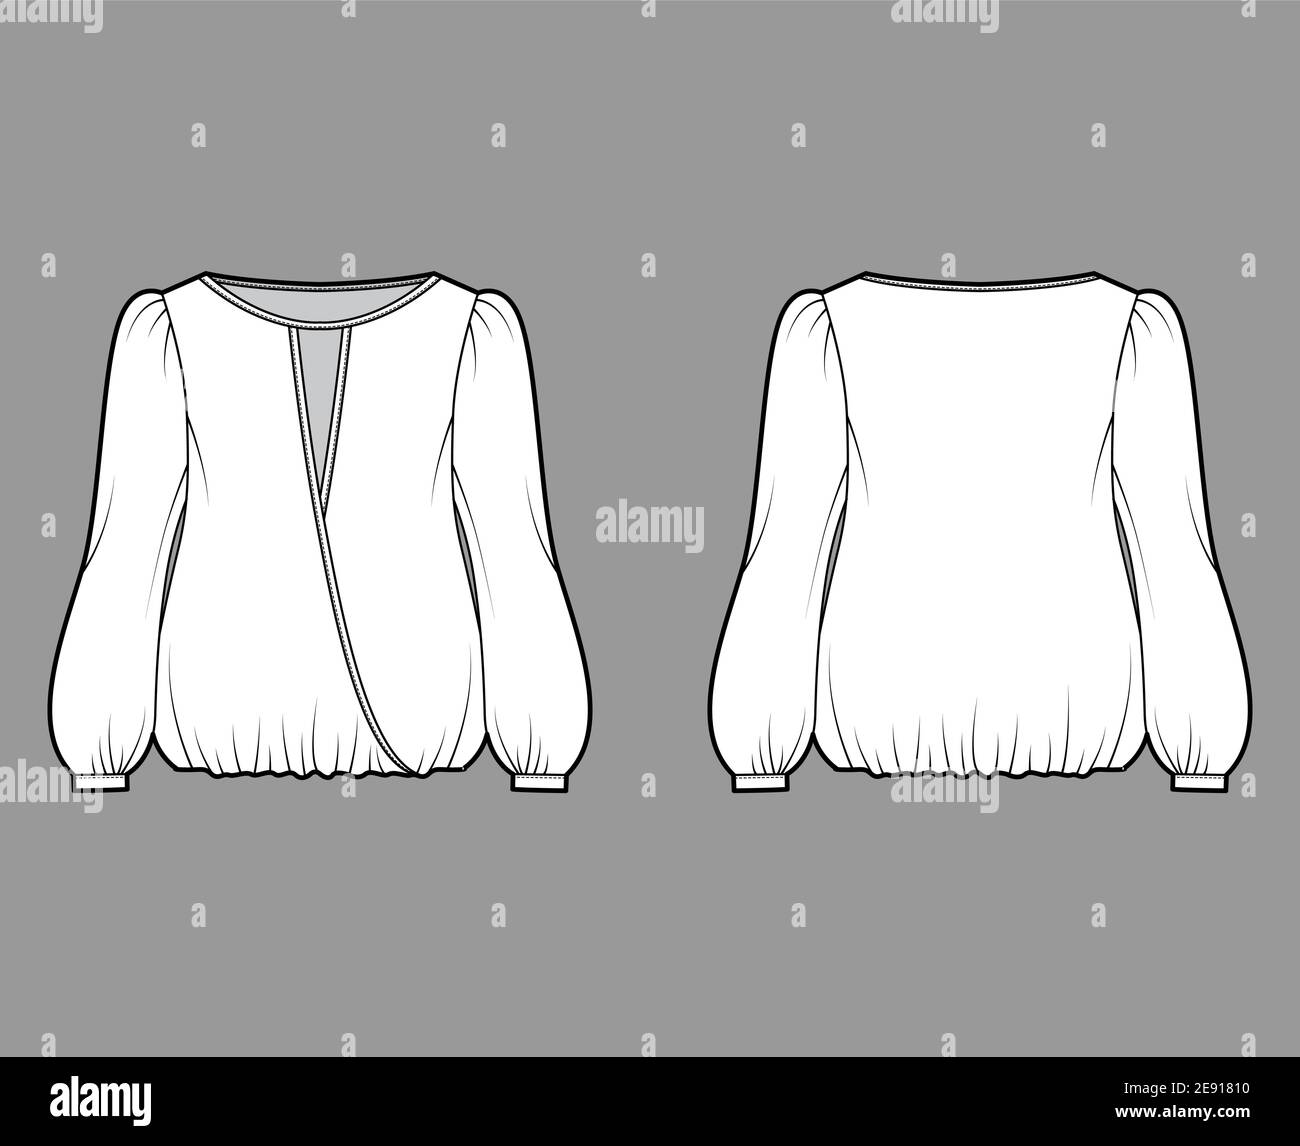 Surplice blouse technical fashion illustration with bouffant long sleeves, gathered hem, wide wrap scoop neck, oversized. Flat shirt apparel top template front, back, white color. Women men CAD mockup Stock Vector